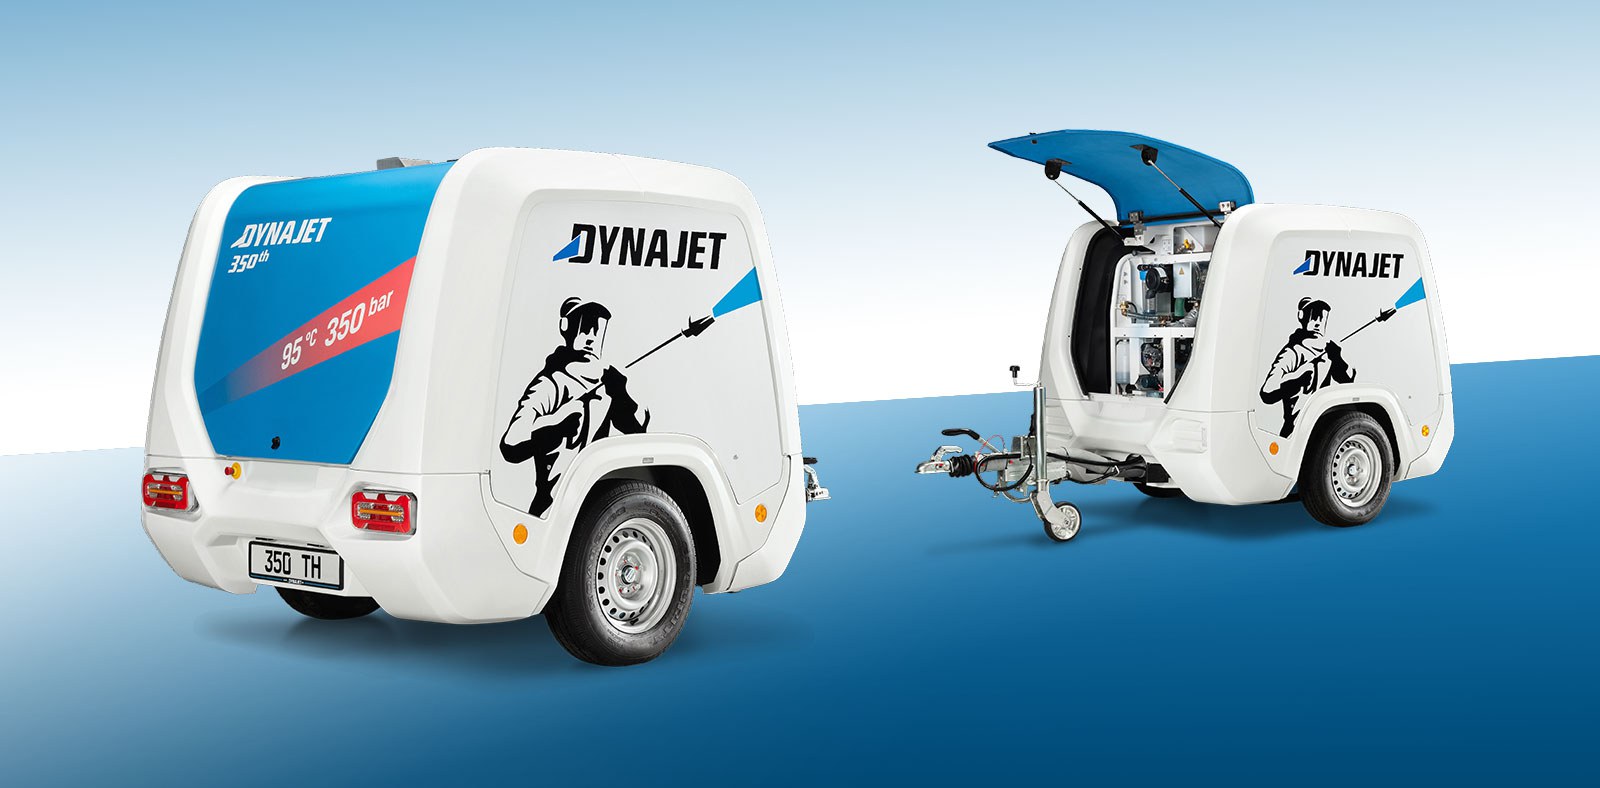 The new DYNAJET 350th Blue Performance - High-pressure water cleaner with digital control and up to 350 bar working pressure